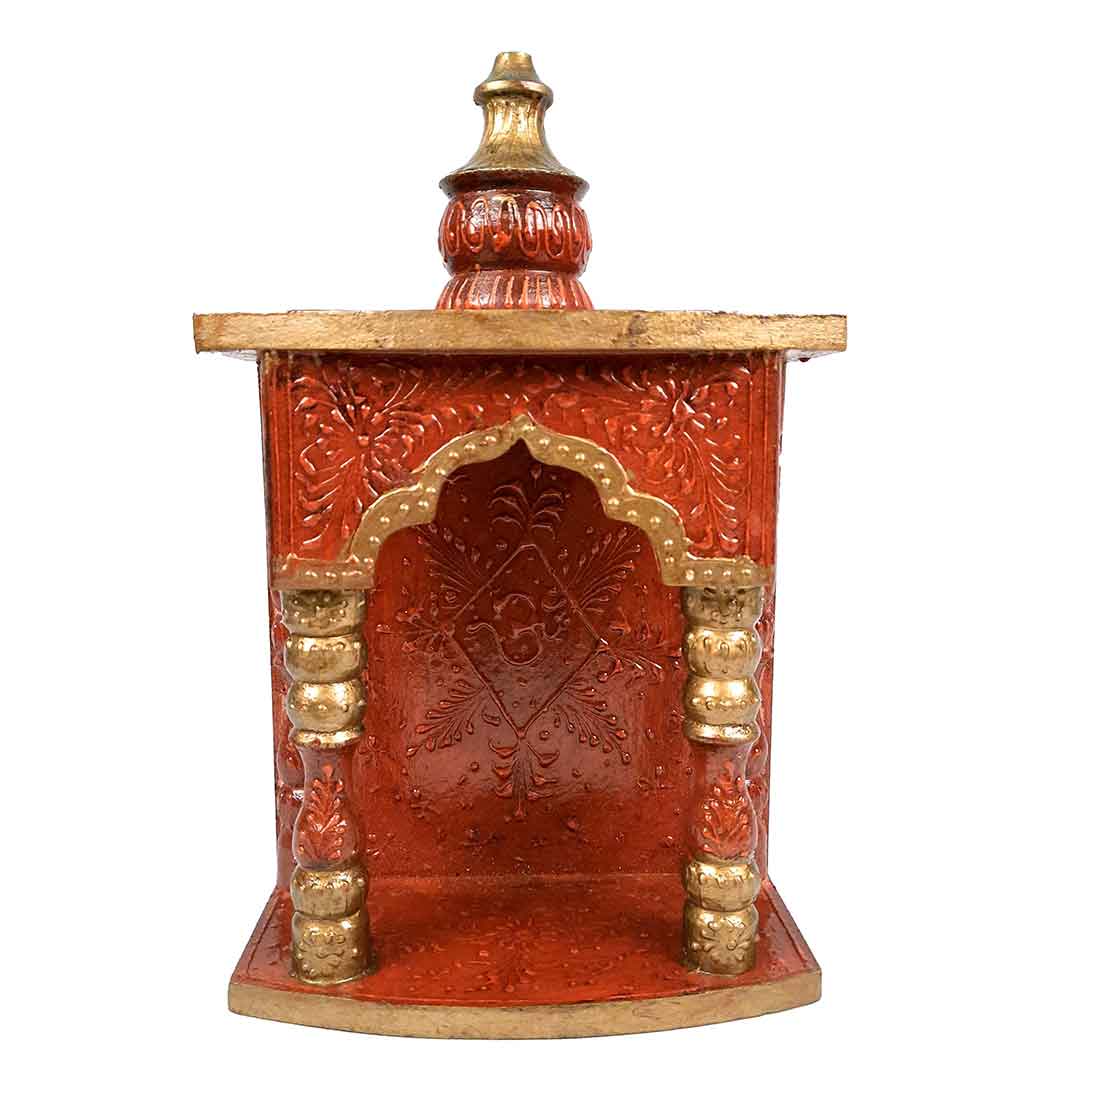 Home Temple for Worship | Puja Mandir Wooden |  Pooja Stand / Unit Wall Hanging With Detachable Gumbad – For Home, Ghar, Office & Shop  - 11 Inch